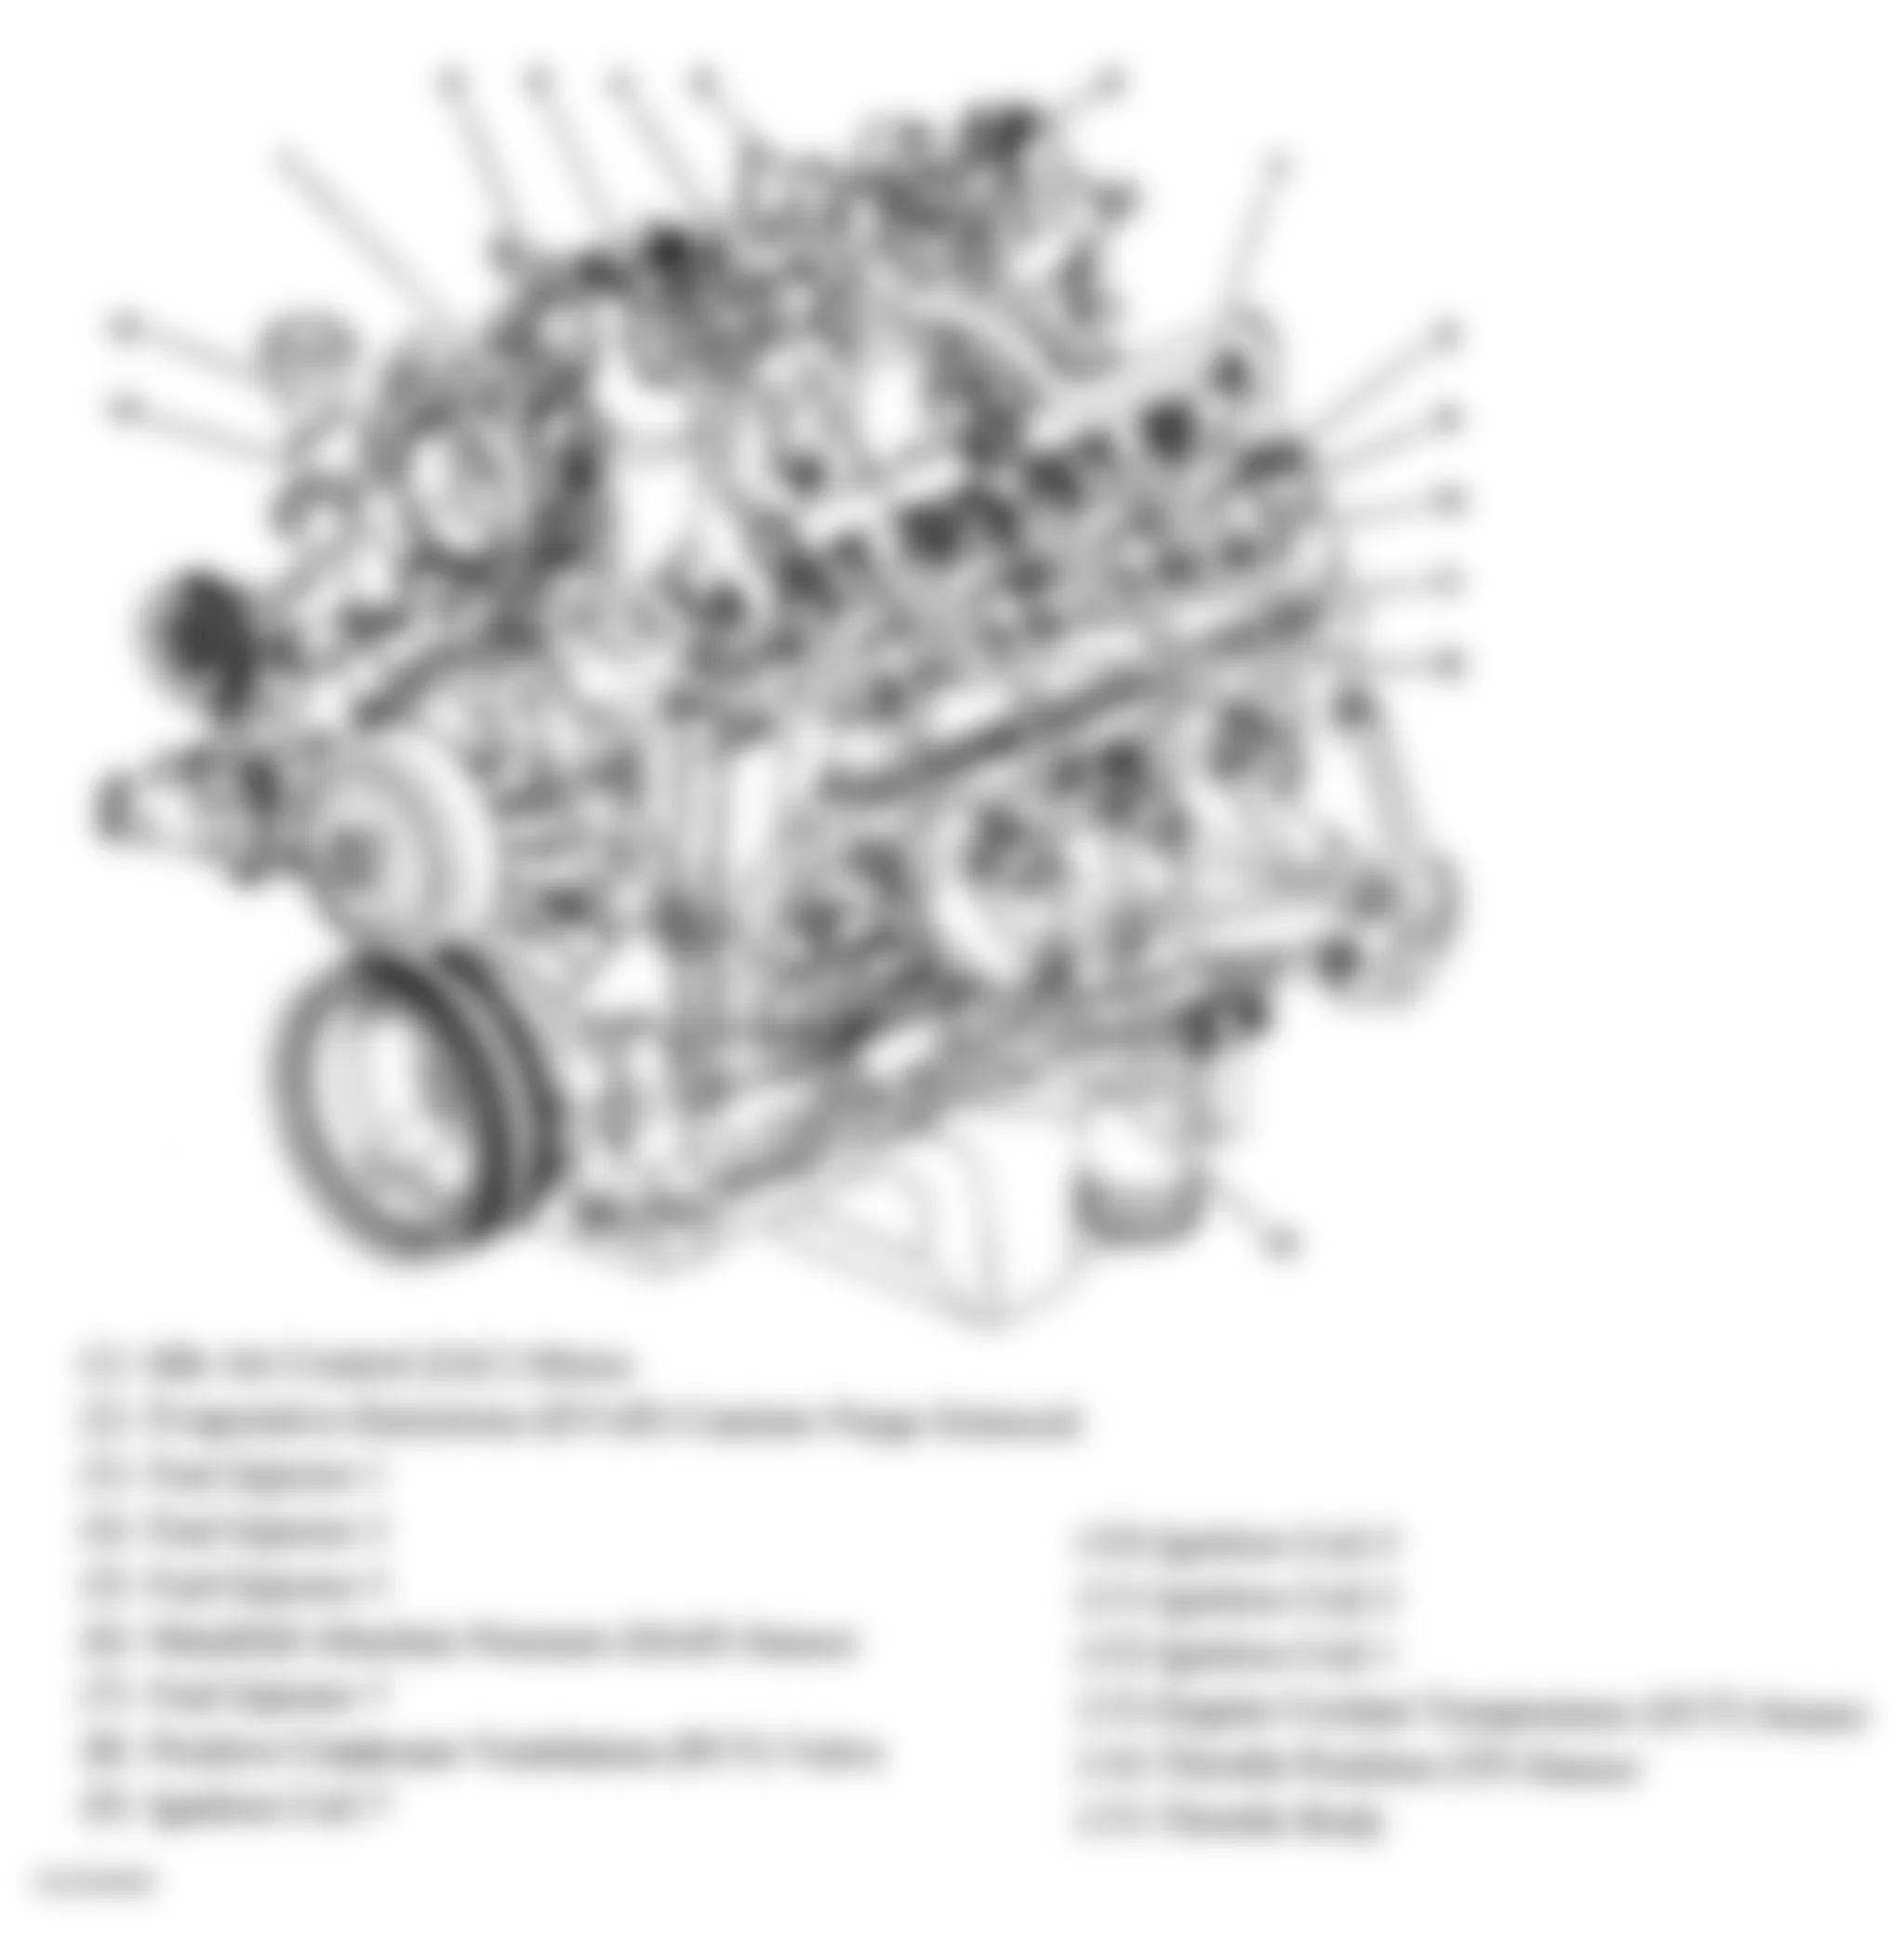 GMC Sierra 3500 2005 - Component Locations -  Left Side Of Engine (4.8L, 5.3L & 6.0L)